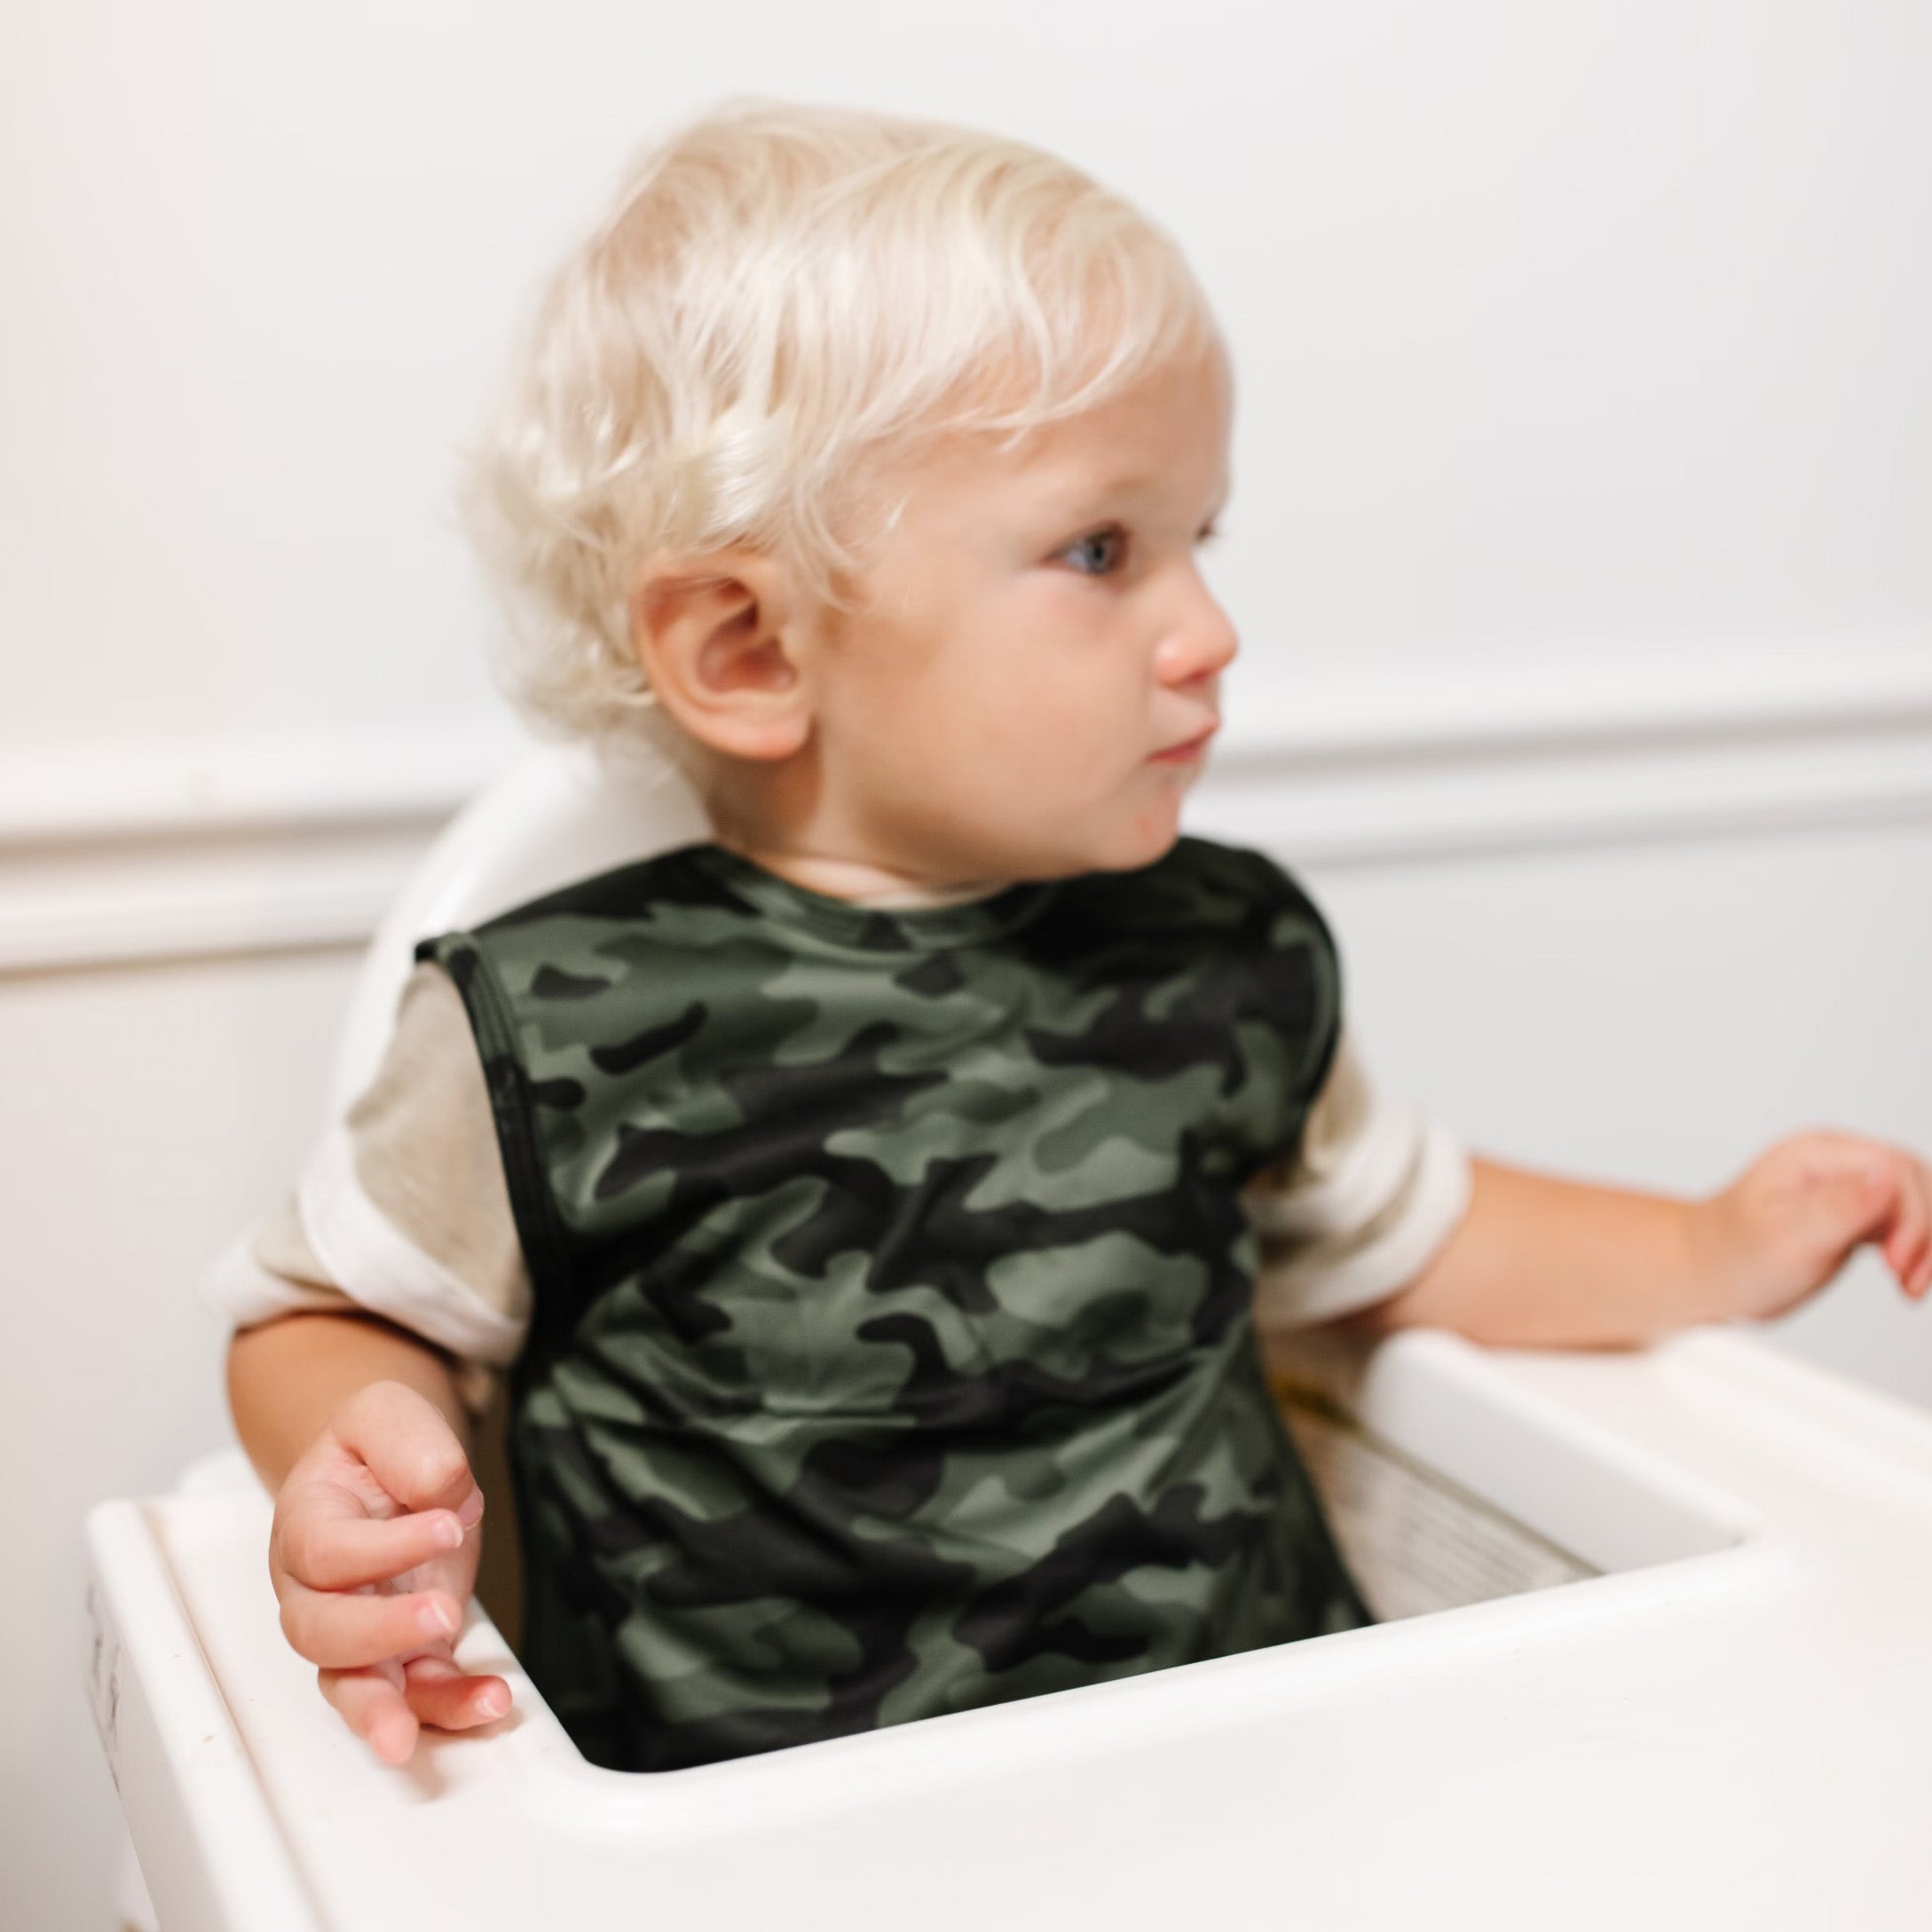 Baby sitting in a high chair wearing the Camo Cutie Bapron.